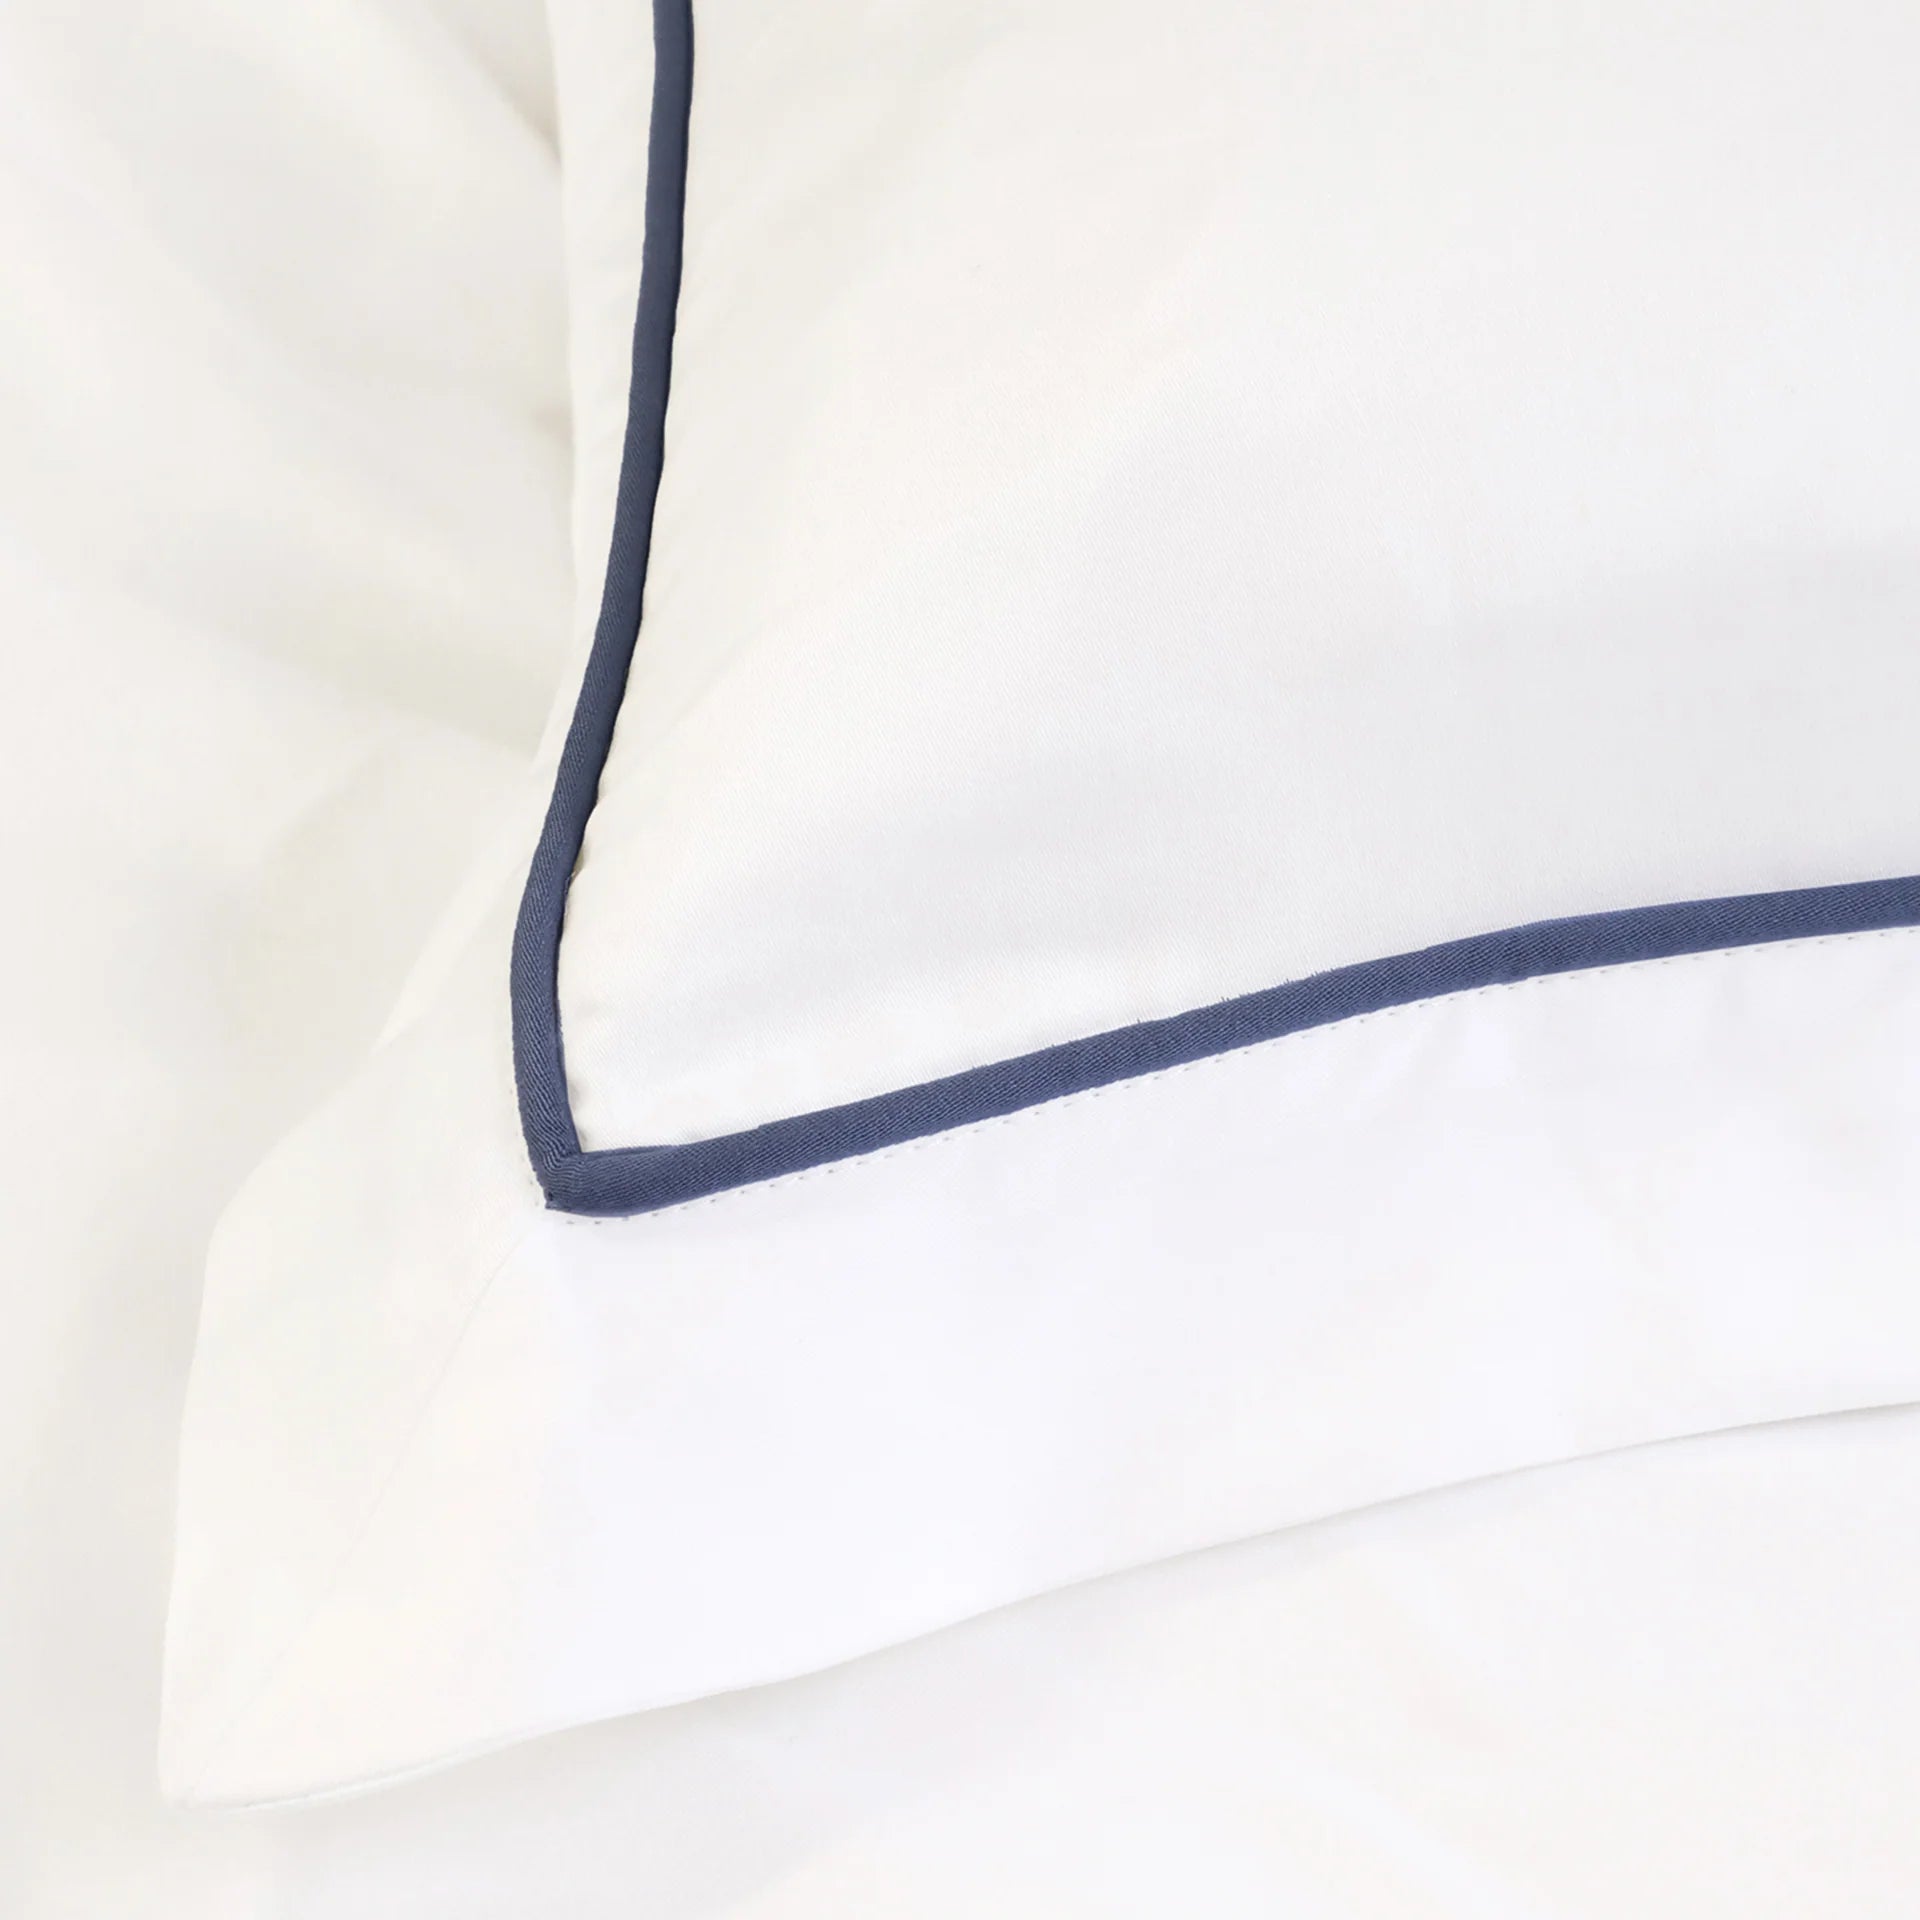 Sheena Bamboo Sateen Sheet Set In Navy by Pom Pom at Home